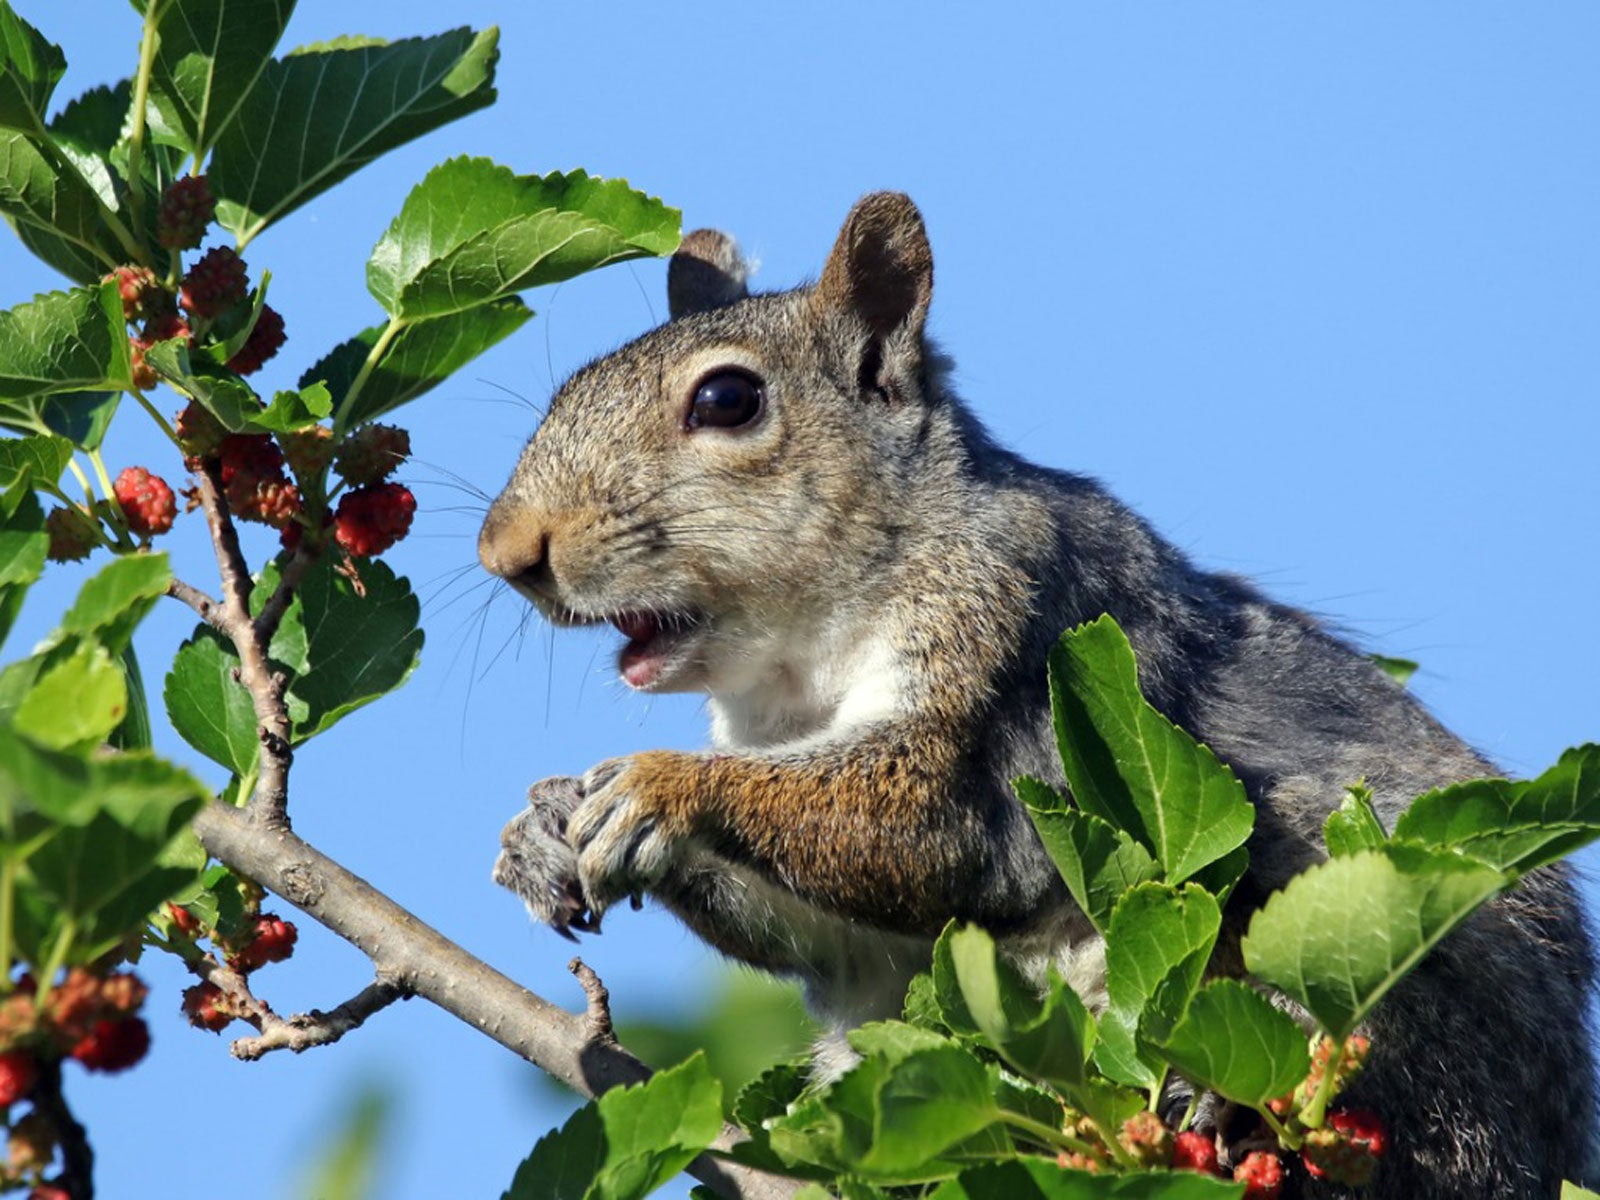 How to squirrel proof fruit trees